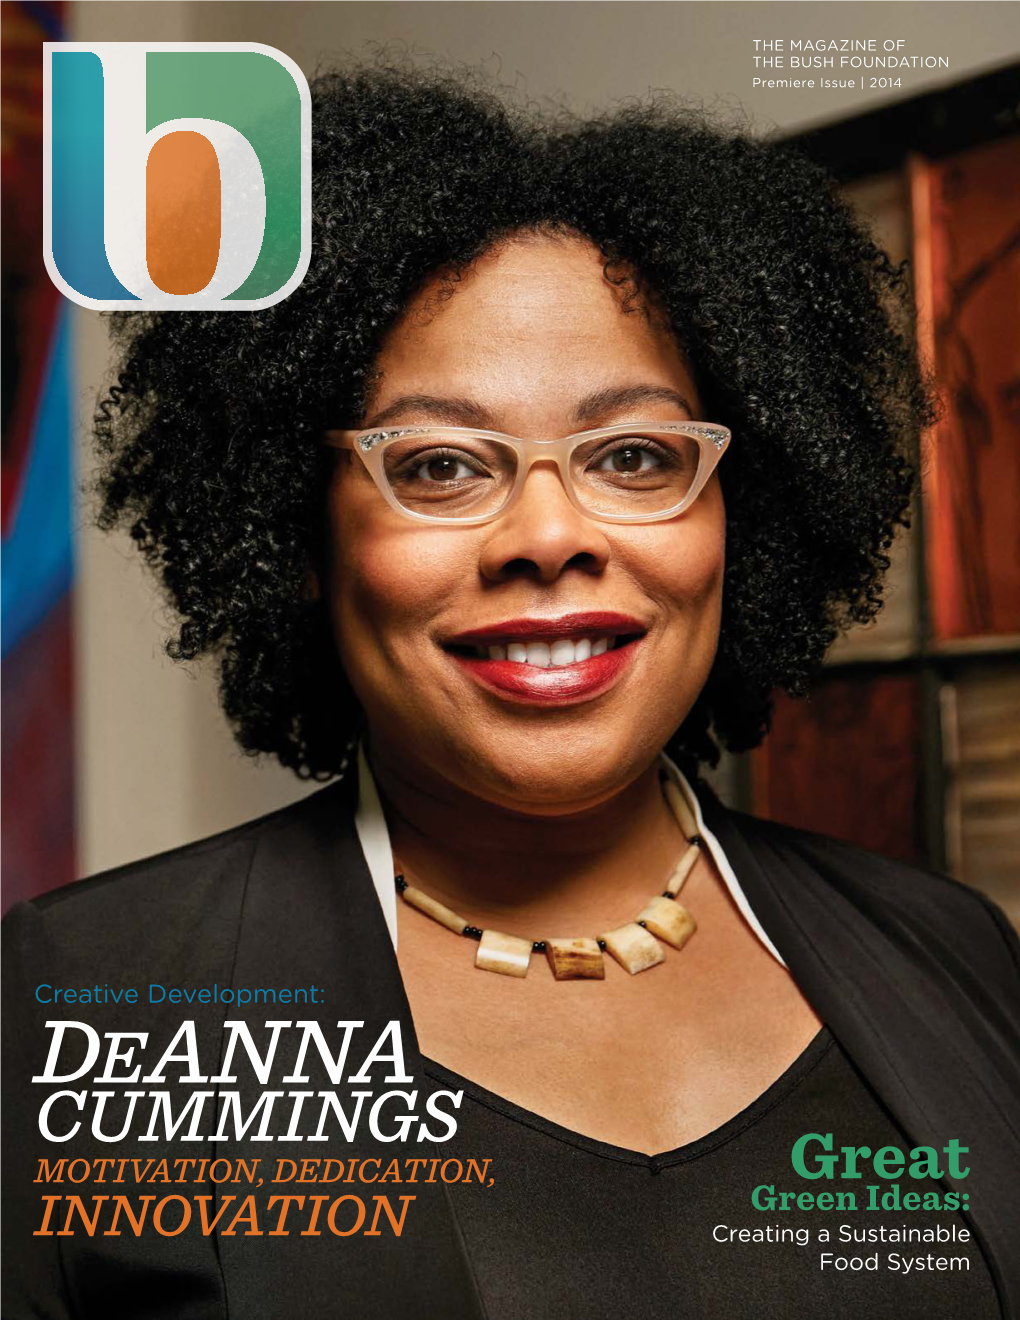 Deanna CUMMINGS MOTIVATION, DEDICATION, Great Green Ideas: INNOVATION Creating a Sustainable Food System PREMIERE ISSUE